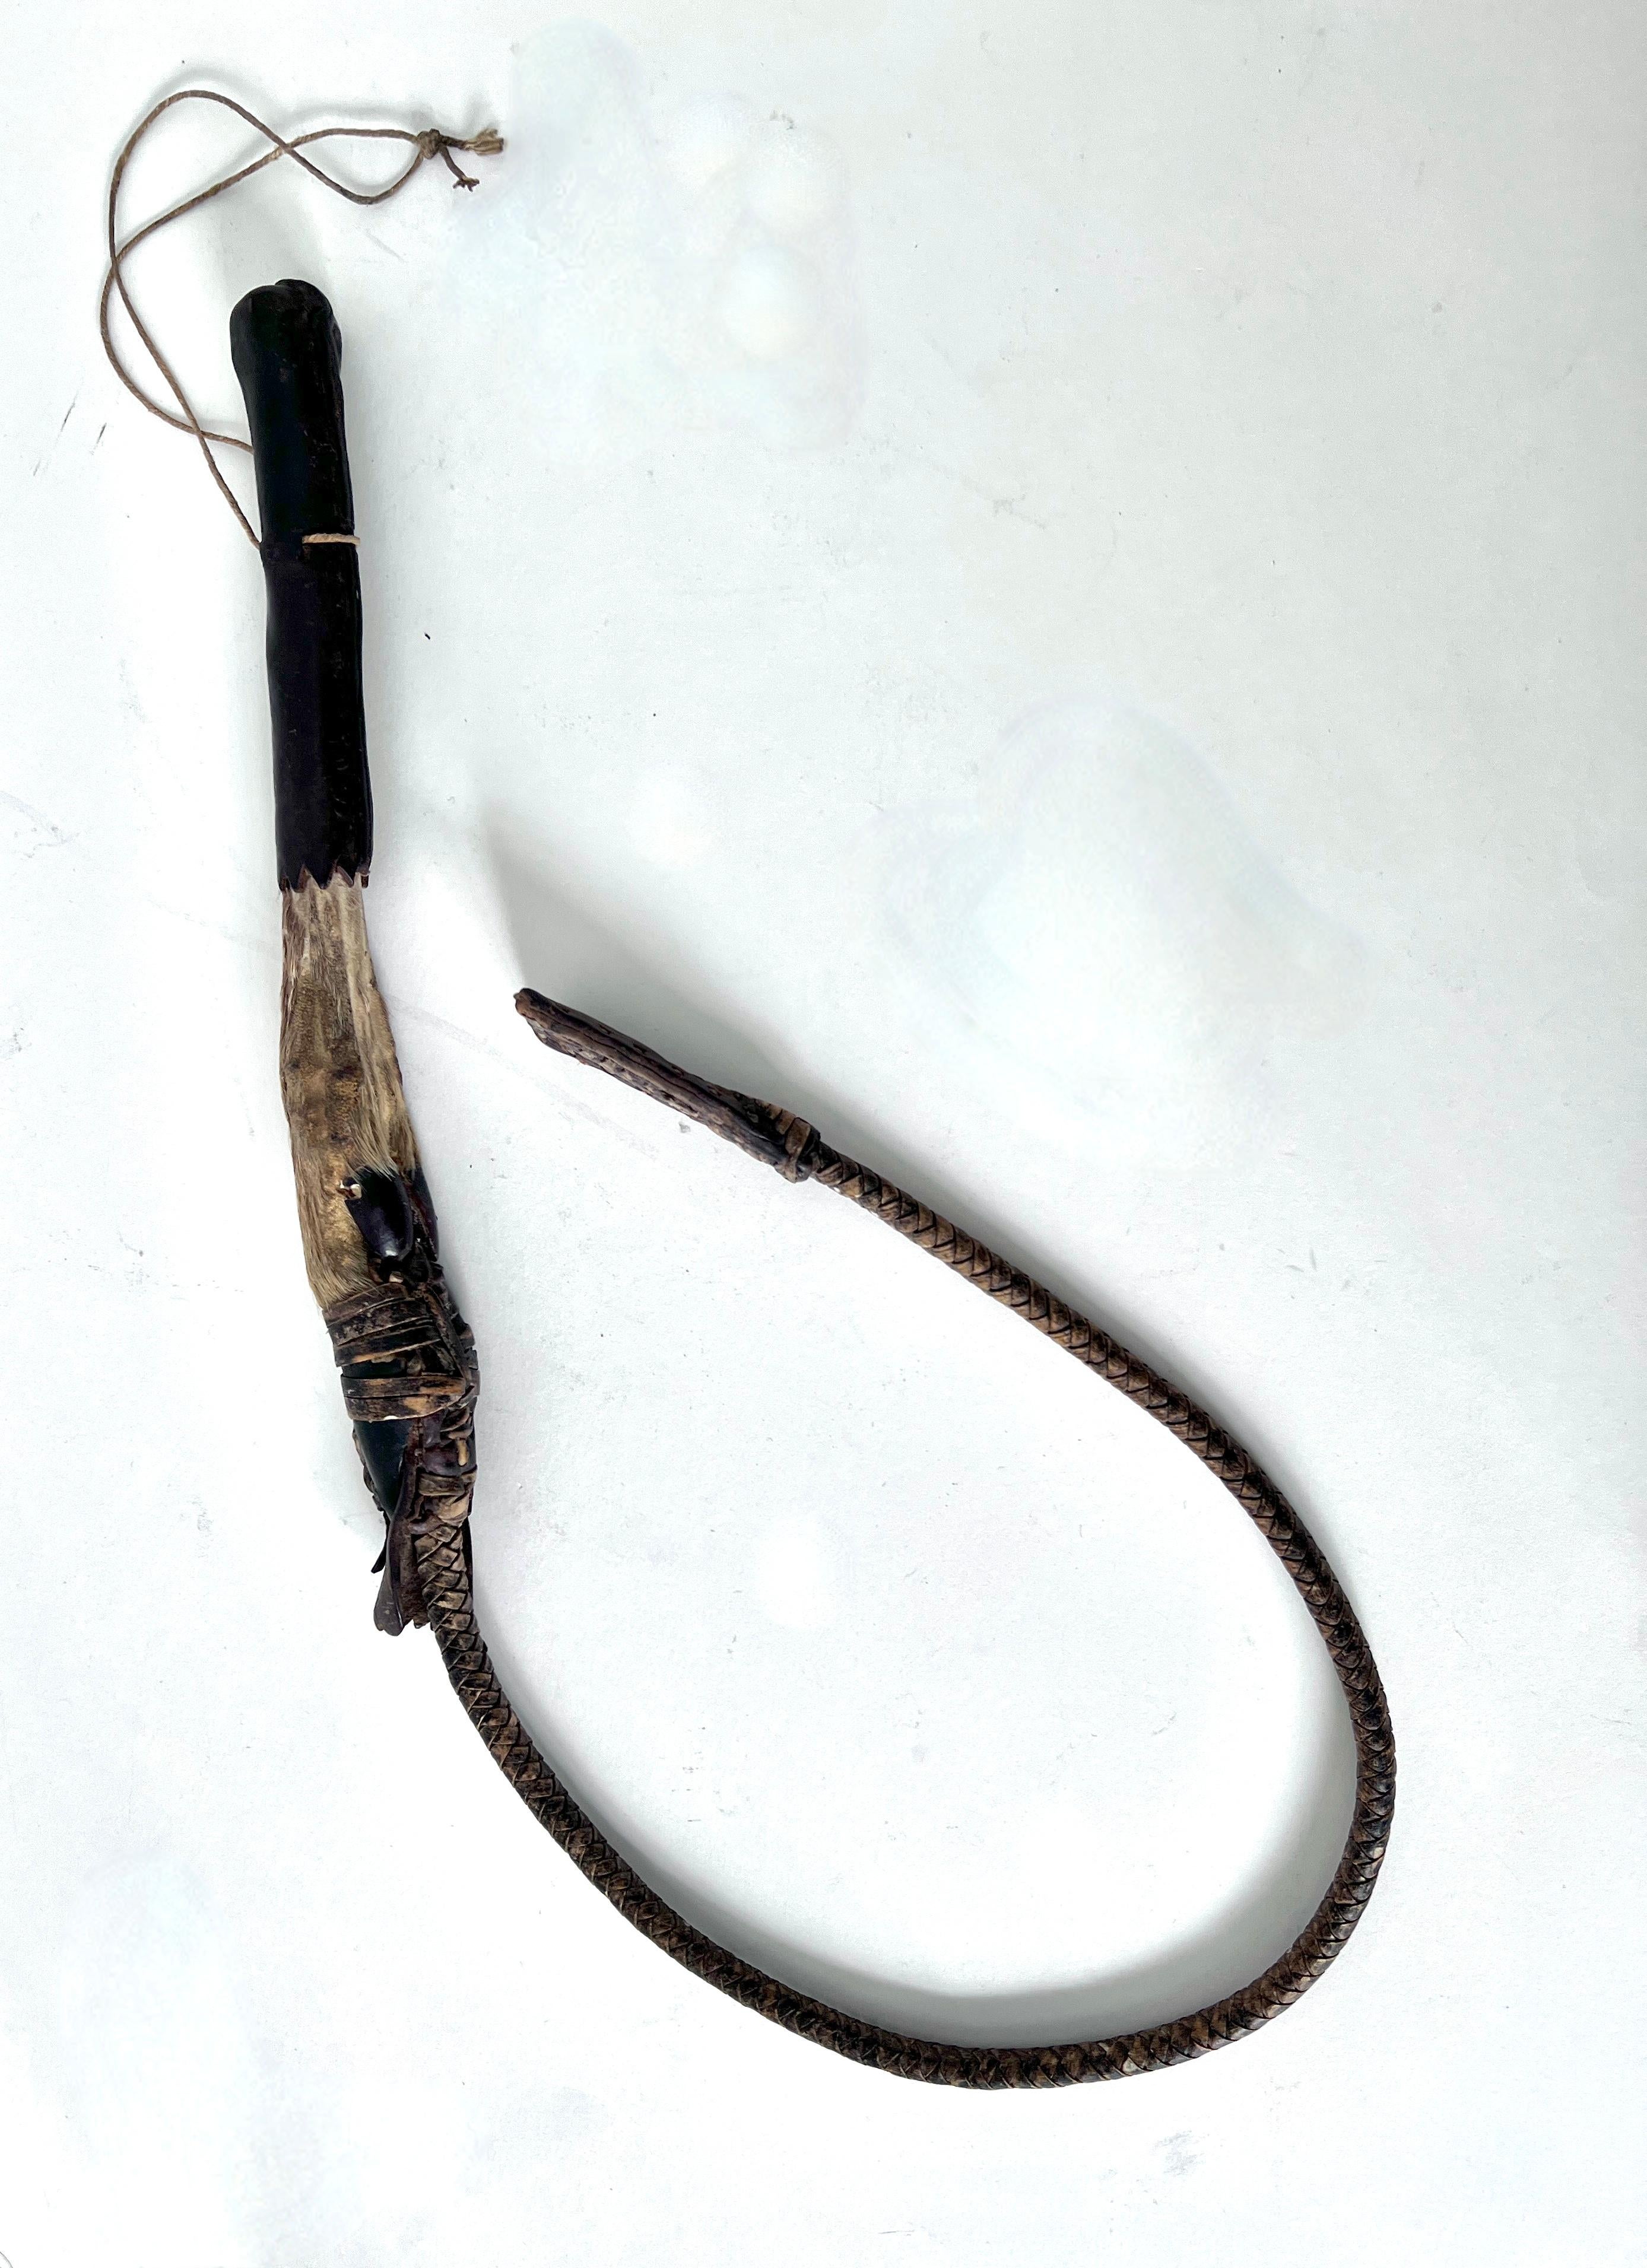 Hand Made / Hand woven leather whip with a hoof handle - the whip Is small and very well presented.  

While the piece is certainly practical, we would see this in a Ralph Lauren Style setting.  A nice addition to any collection or Cabin / western